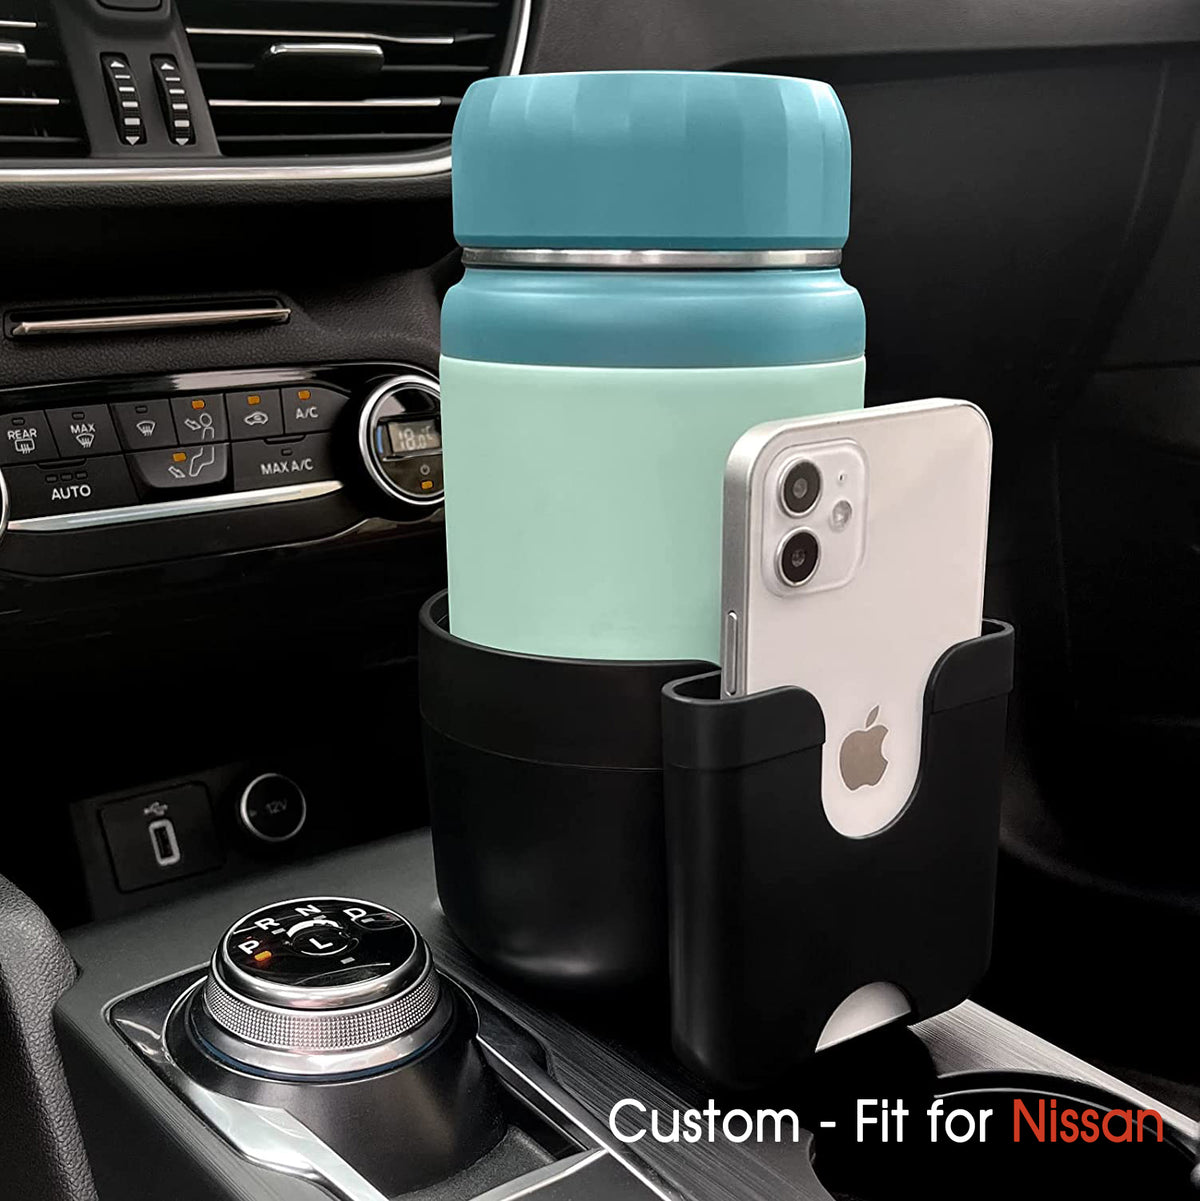 Car Trash Can, Custom For Cars, Mini Car Accessories with Lid and Trash Bag, Cute Car Organizer Bin, Small Garbage Can for Storage and Organization, Car Accessories NS11996